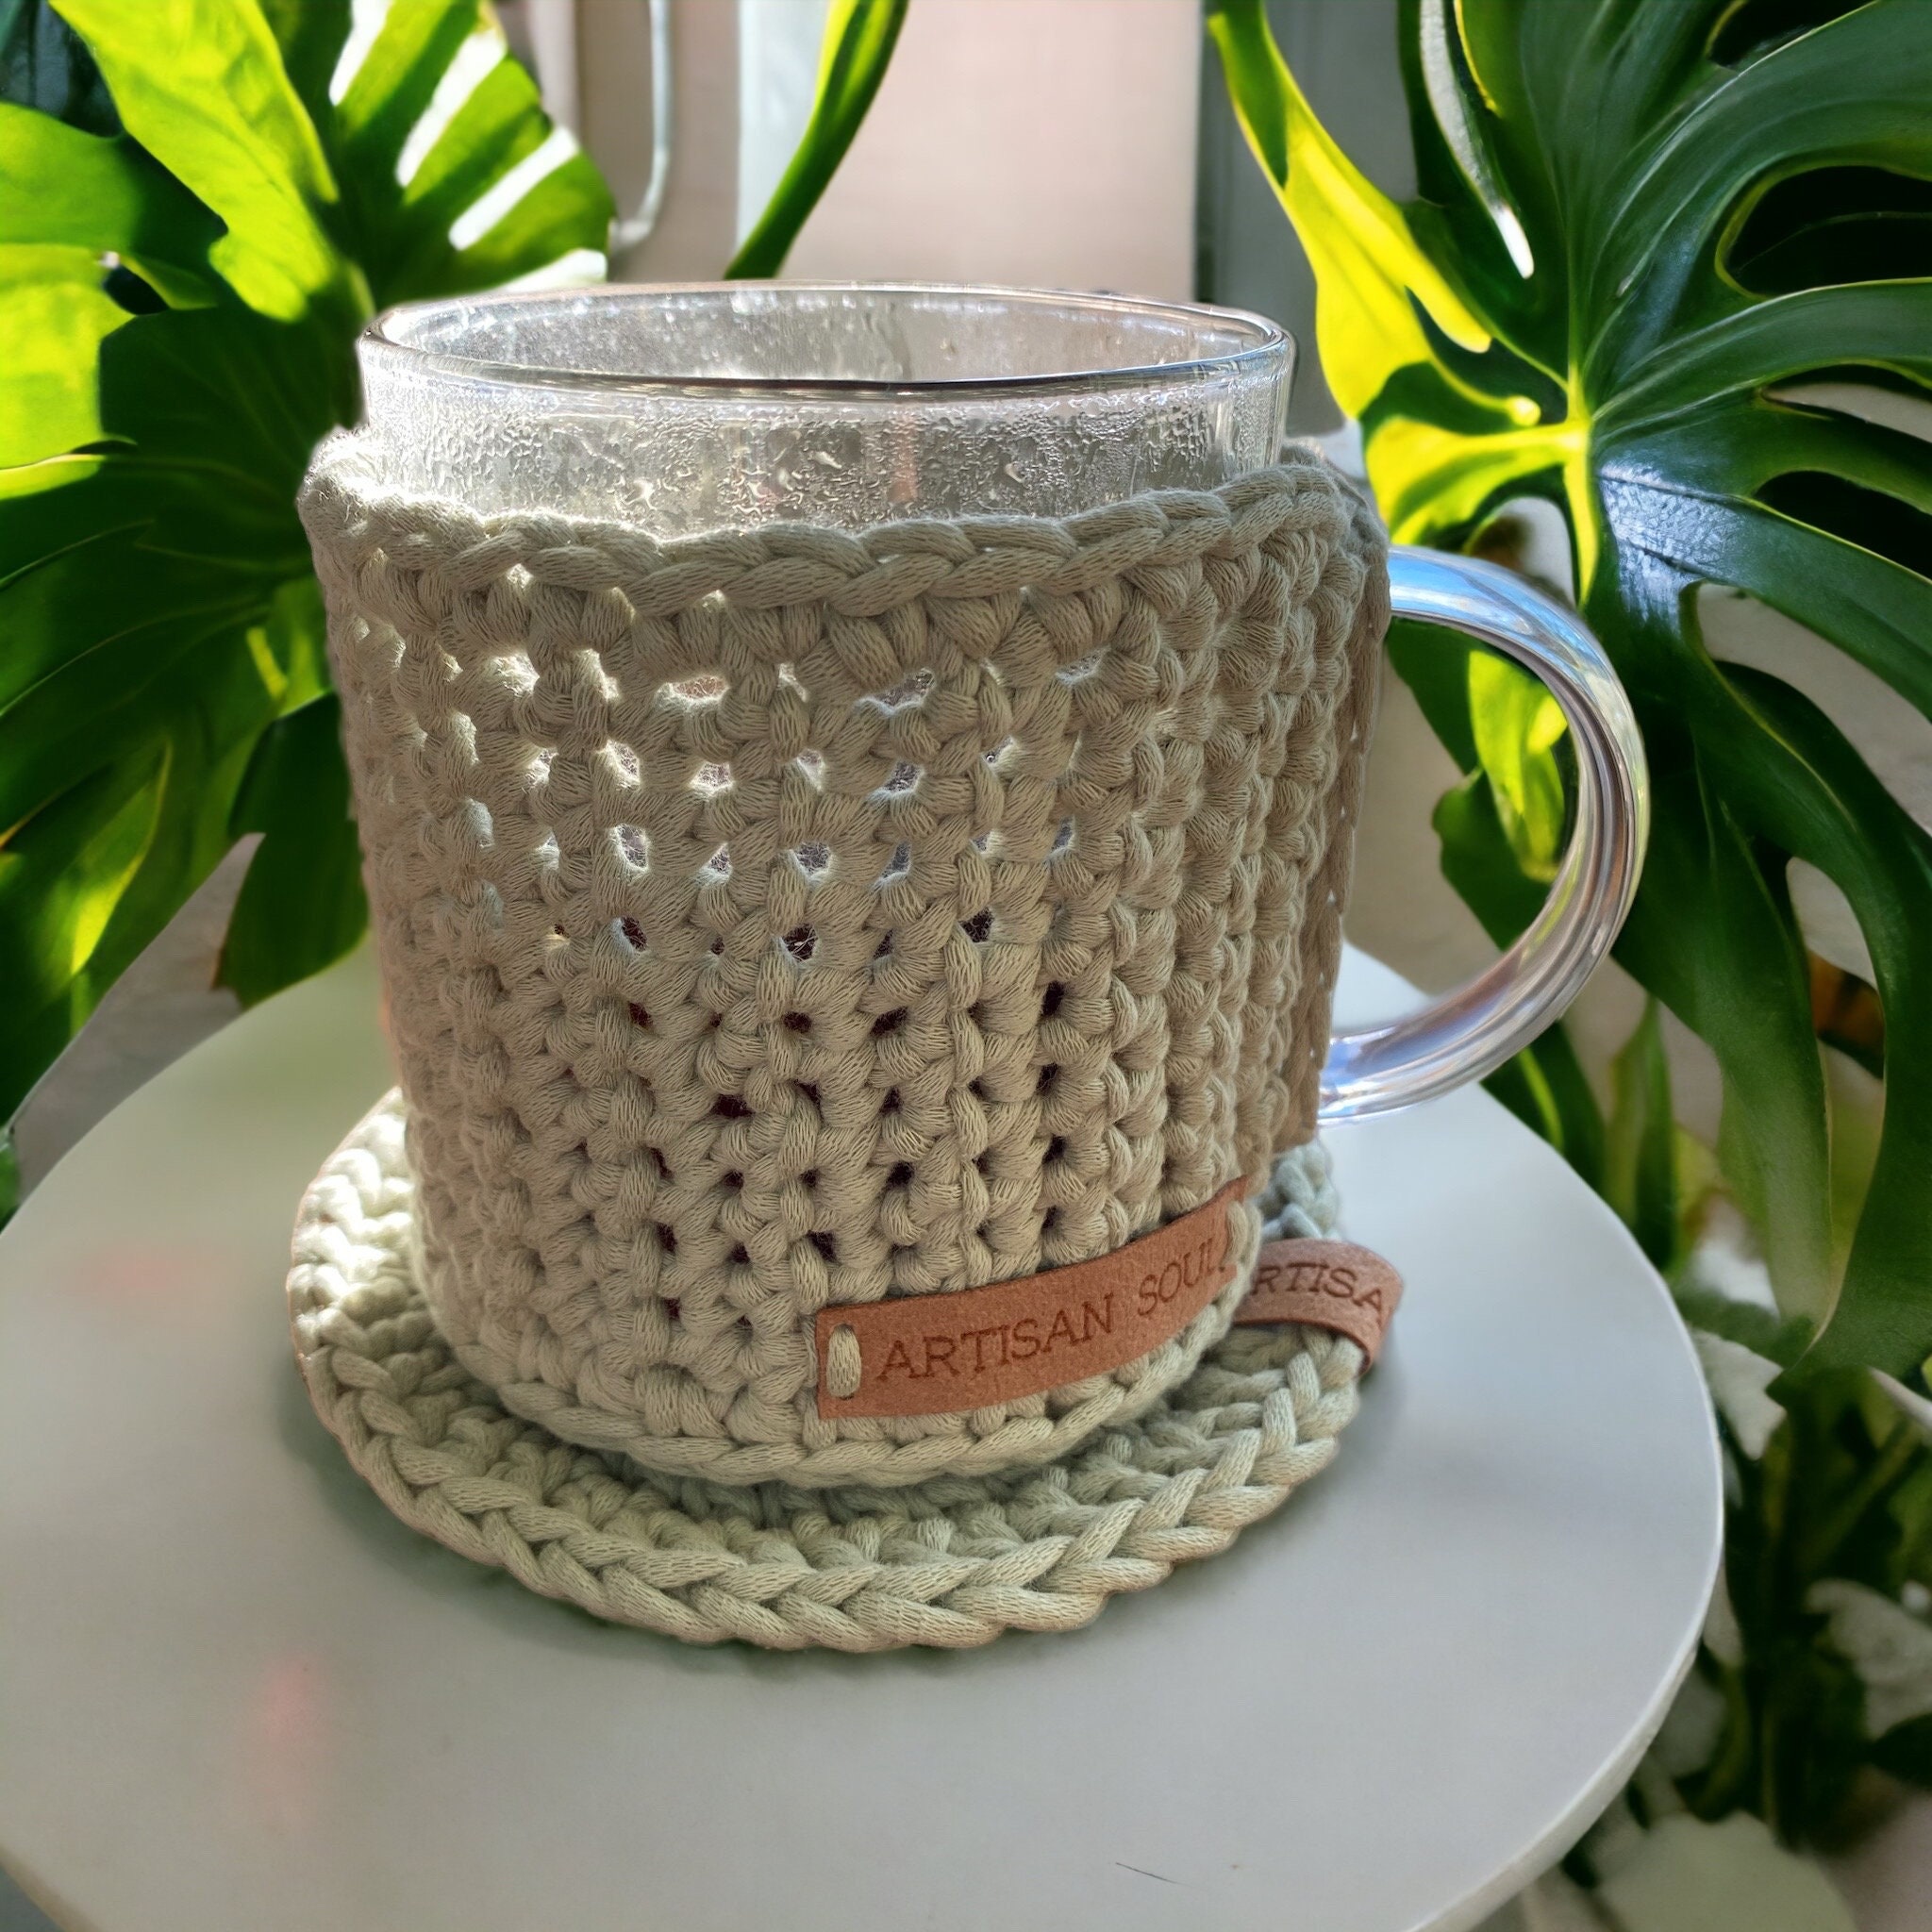 Blush Pink Desk Accessories for Women. Boho Work Space Home Office Decor.  Macrame Coaster With Fringe for Coffee Mug. Cosy Hygge Placemat 